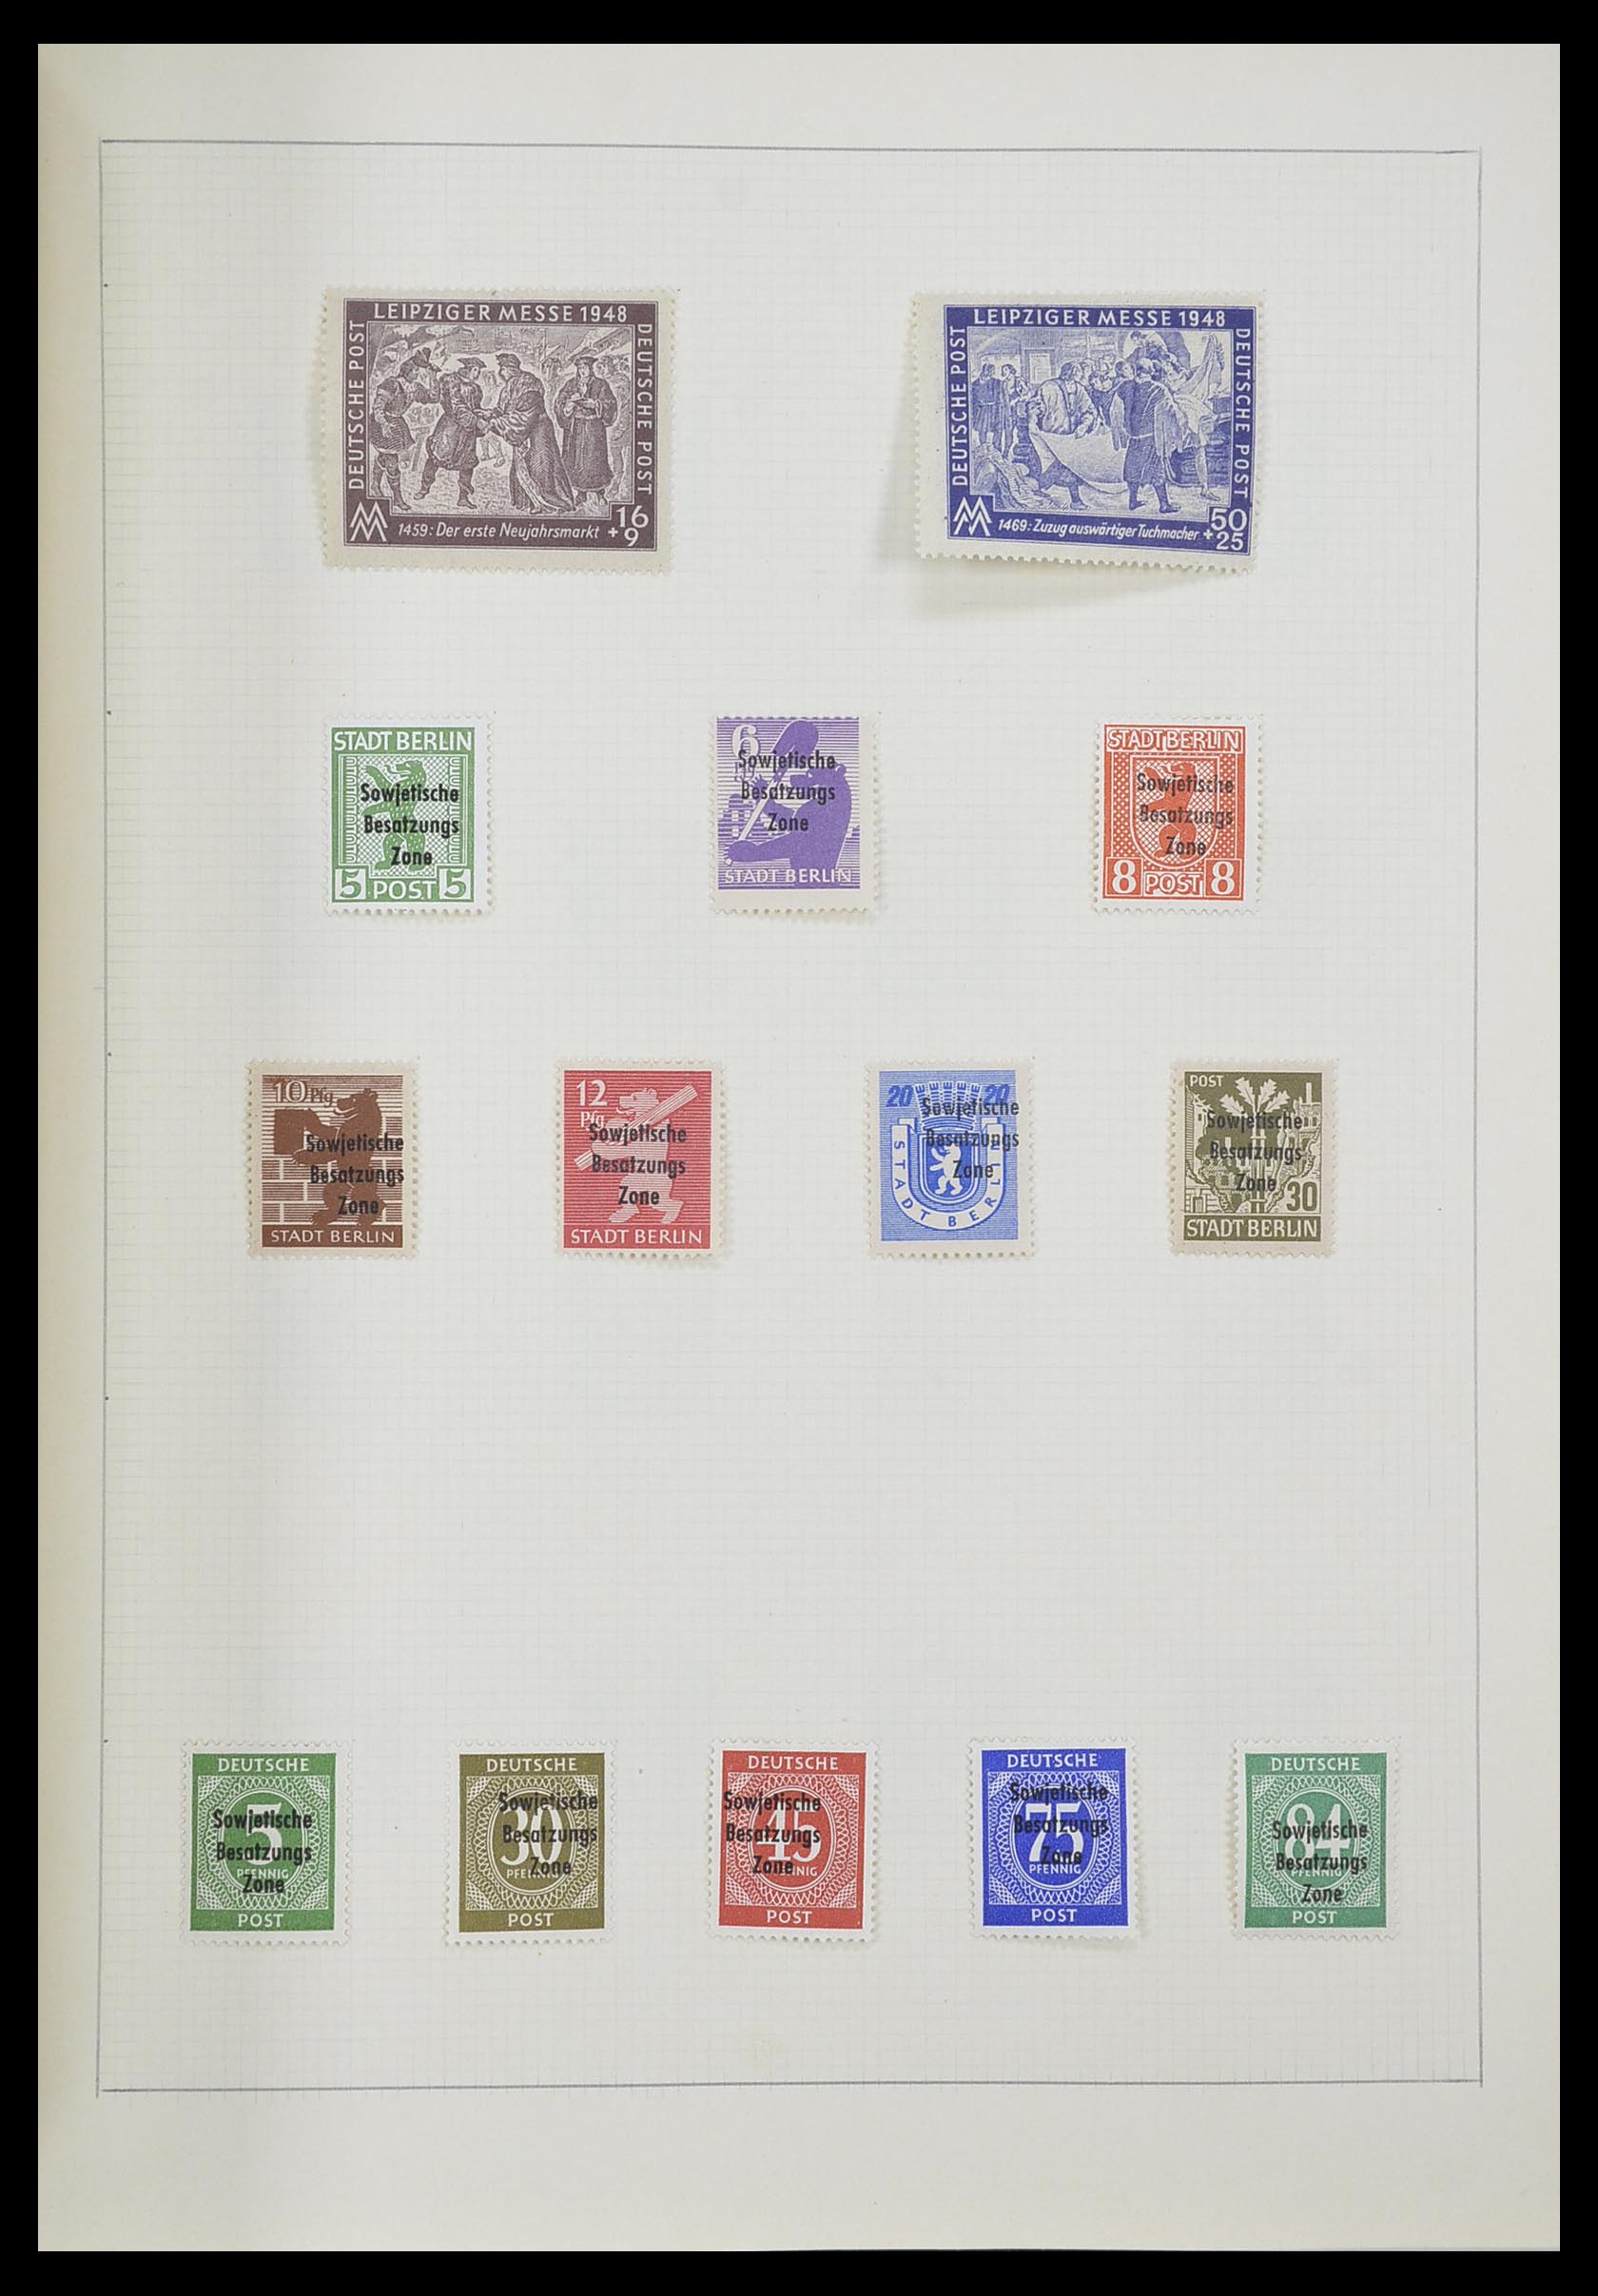 33406 046 - Stamp collection 33406 European countries 1938-1955.